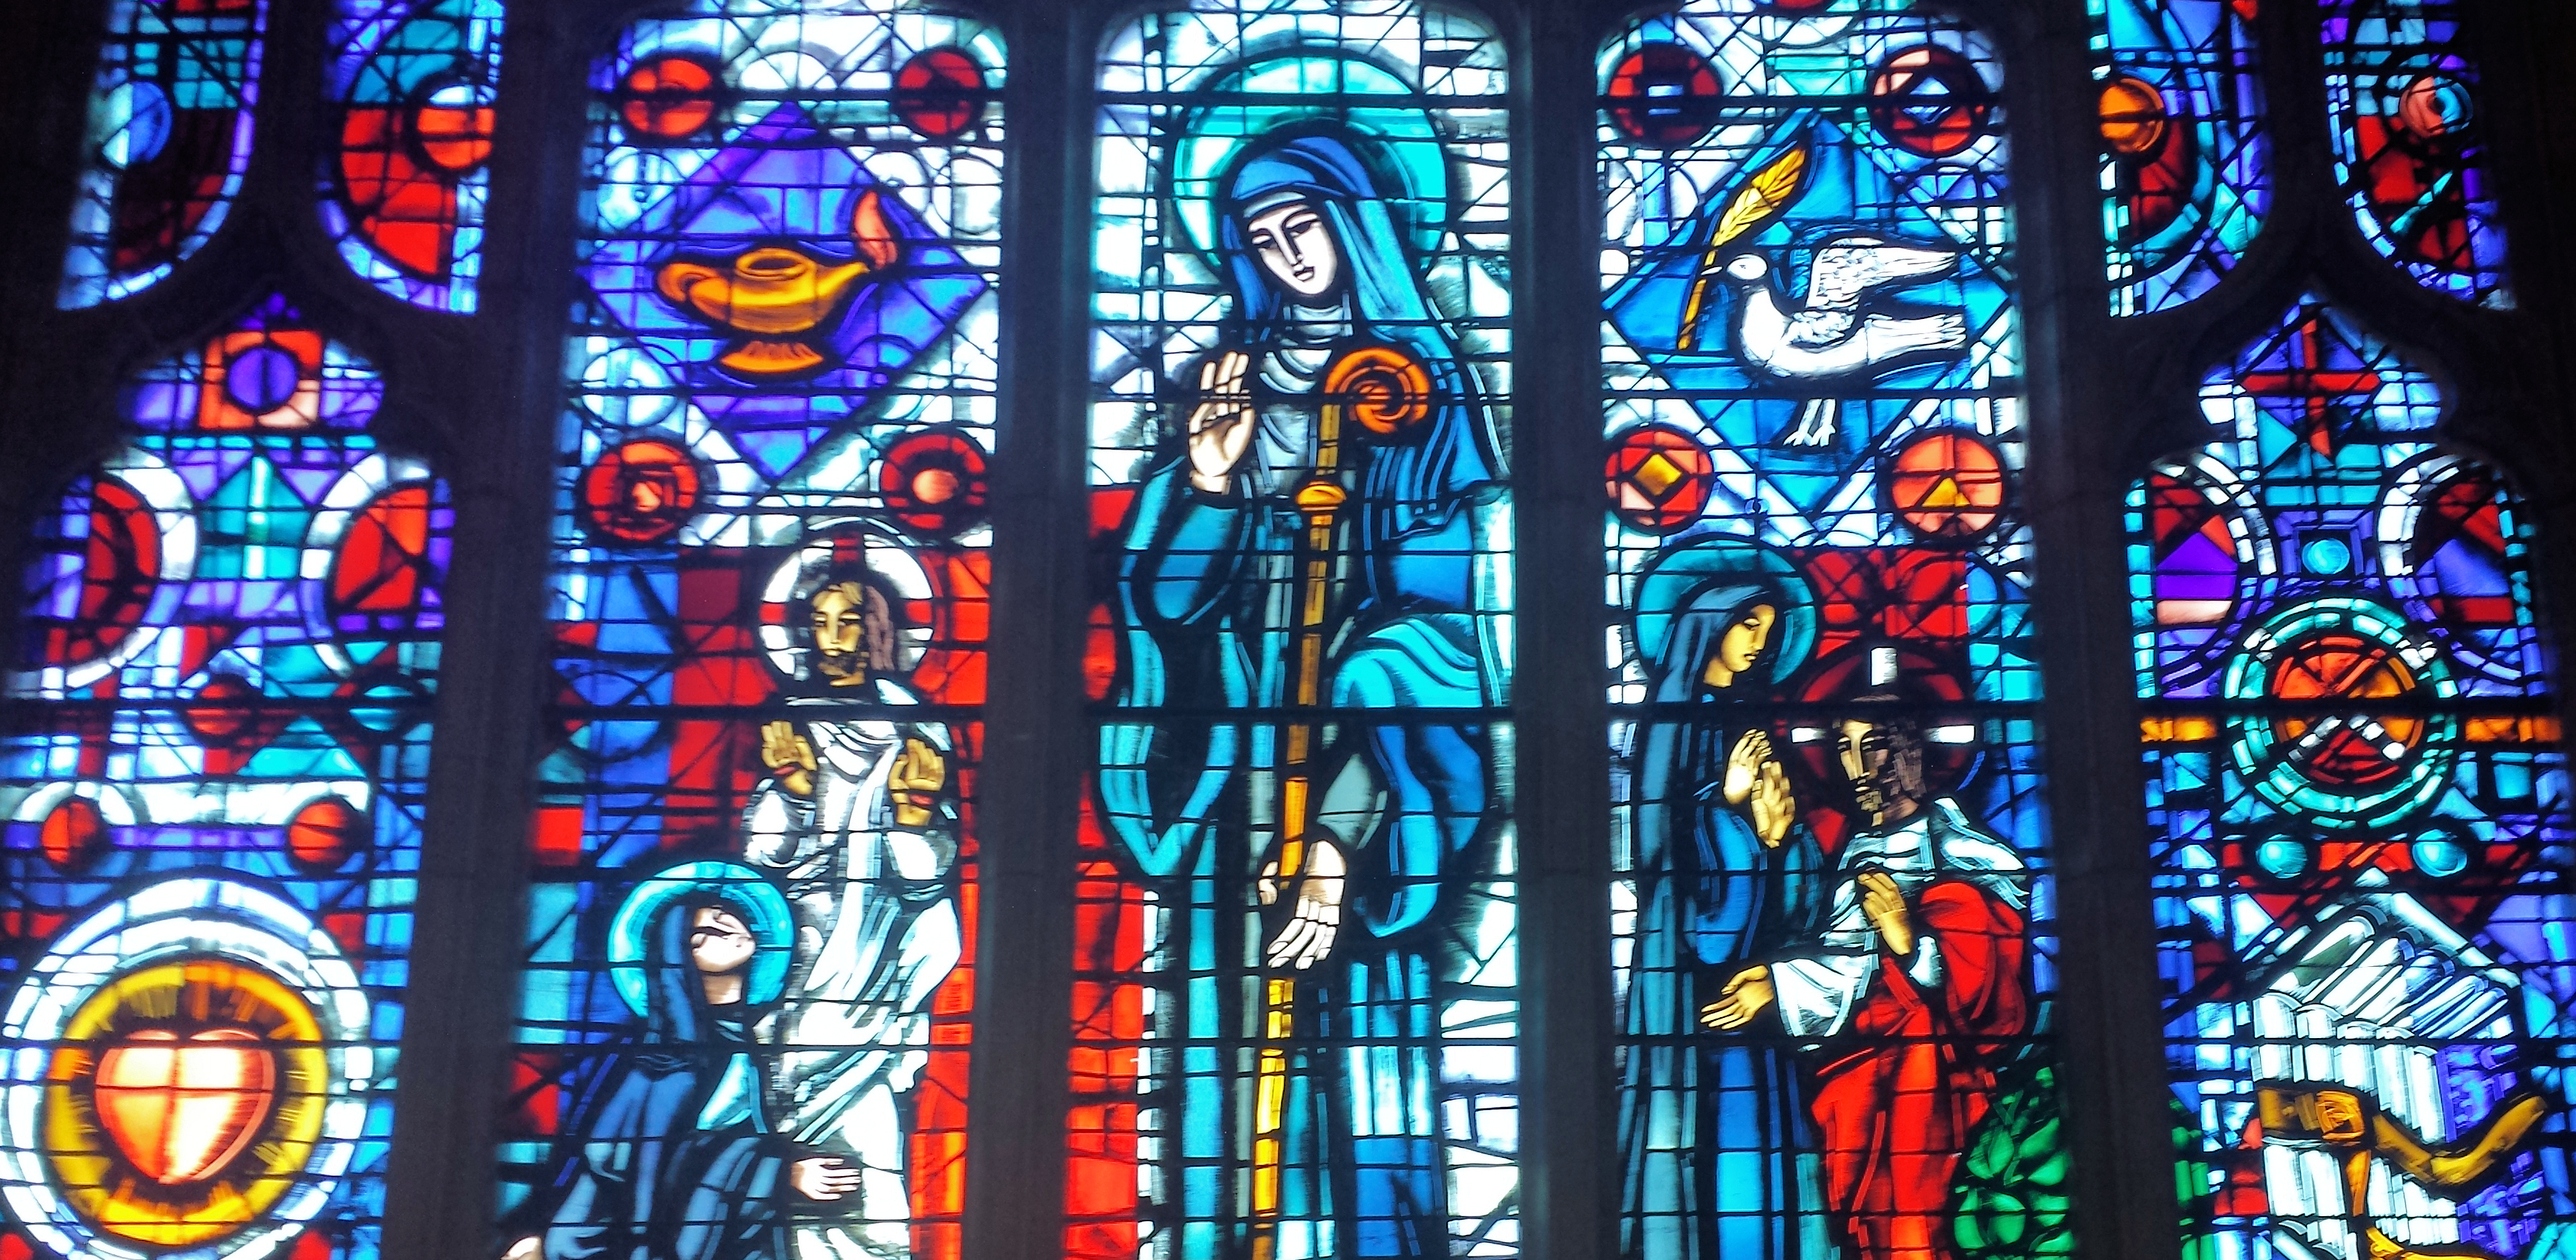 St. Gertrude Stained Glass Window Cropped